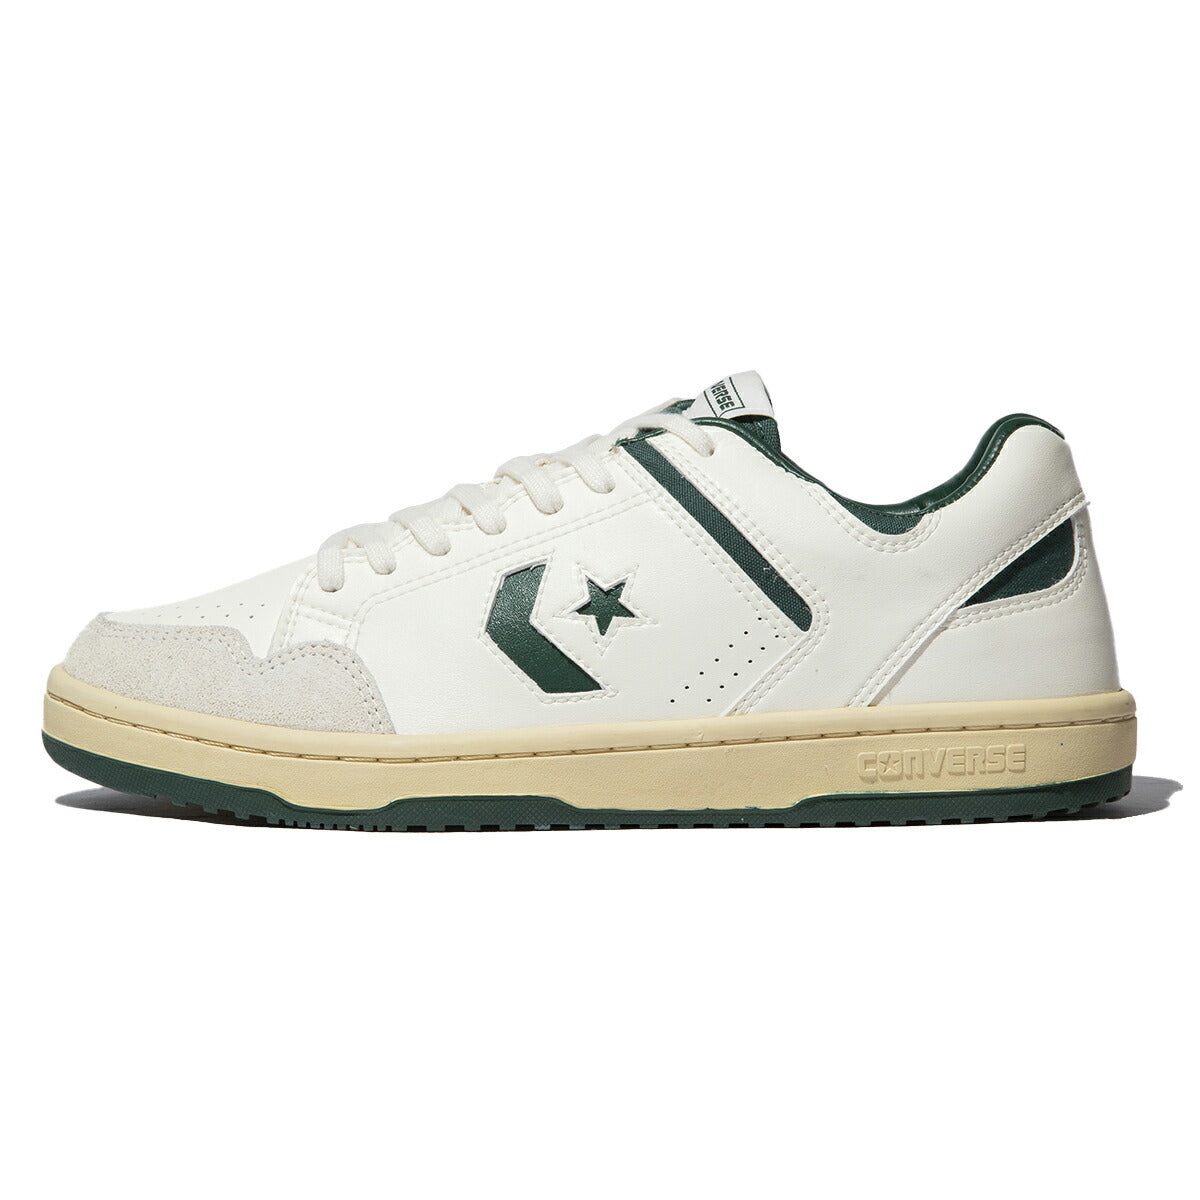 CONVERSE WEAPON SK OX